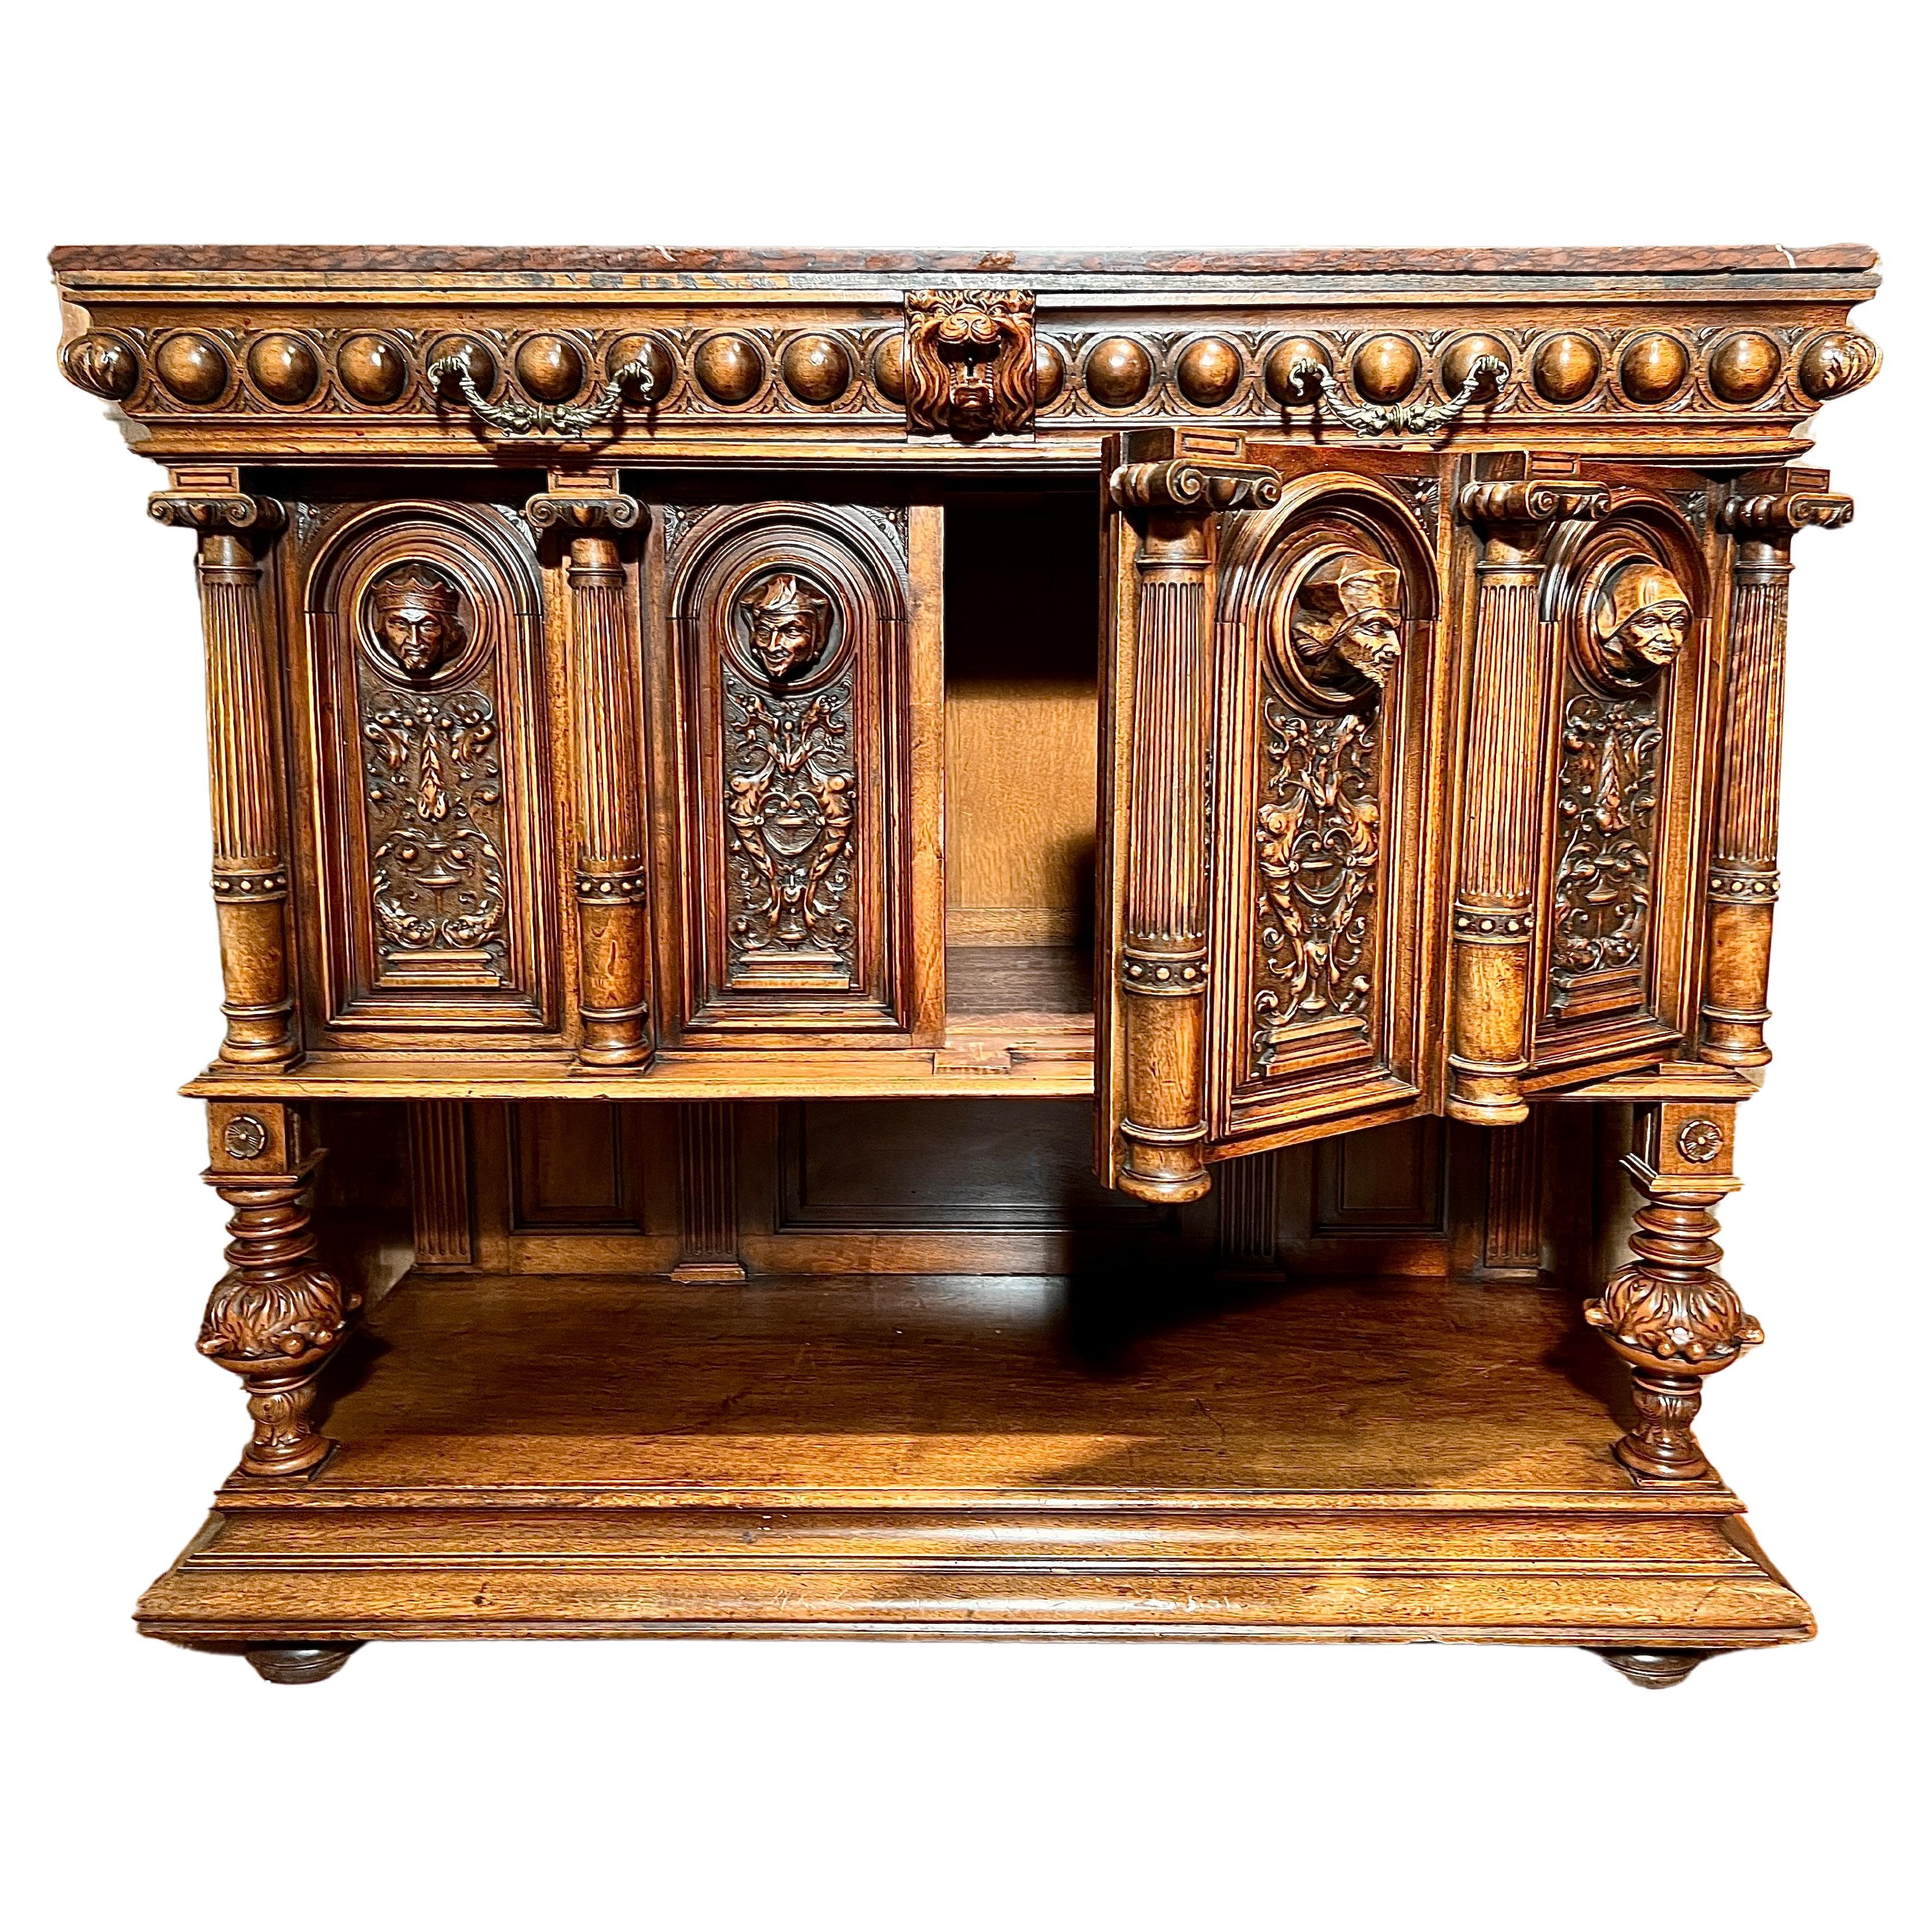 Antique French Marble-Top Walnut Cabinet with Fabulous 